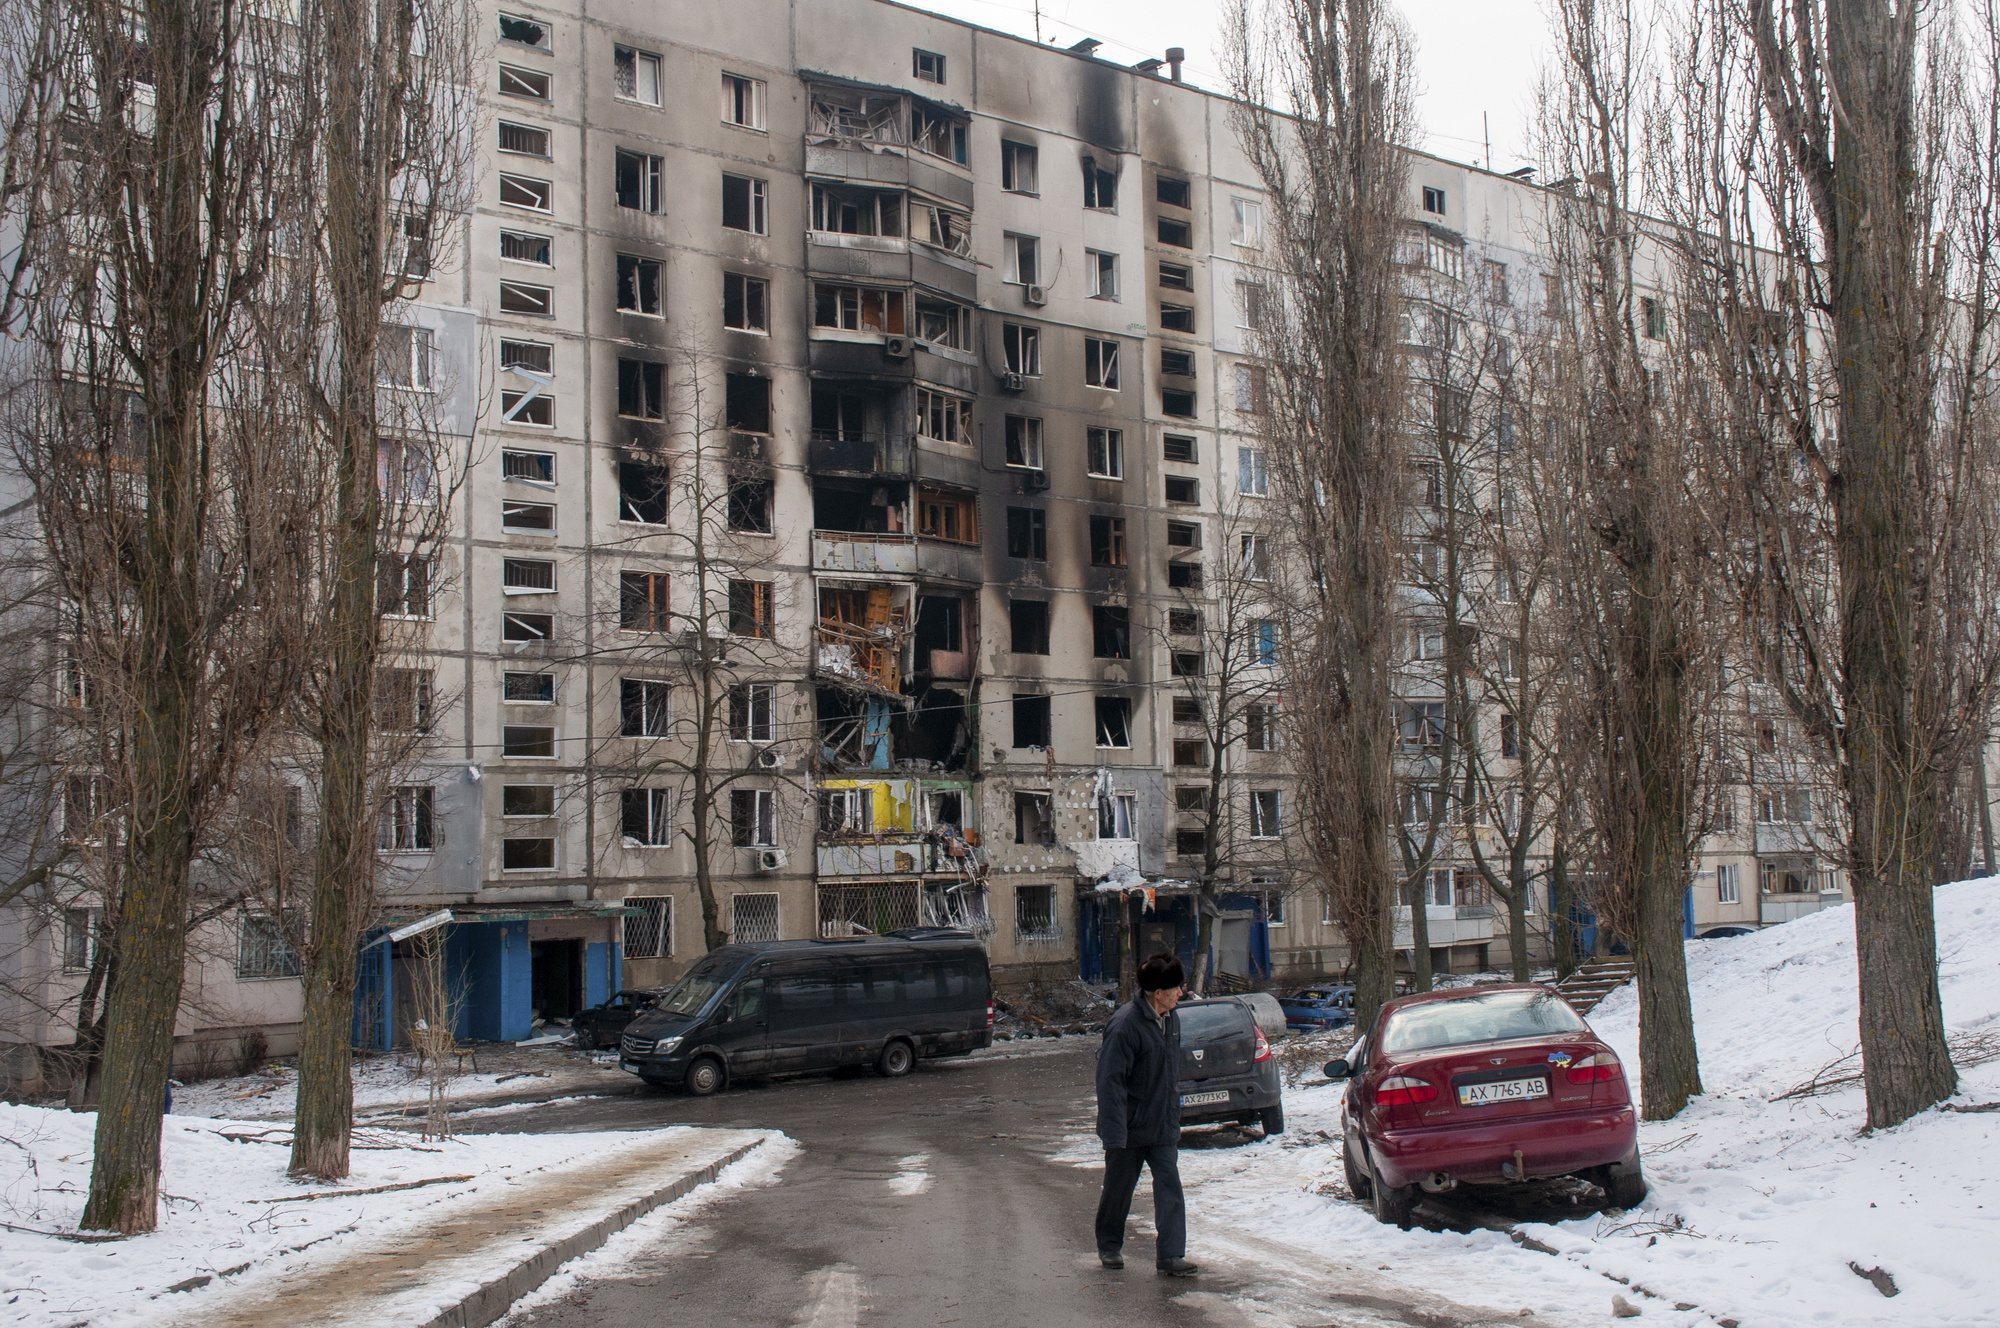 epaselect epa09810163 A man walks past destroyed residential building after shelling in Eastern Ukrainian city of Kharkiv, Ukraine, 08 March 2022. According to the United Nations High Commissioner for Refugees (UNHCR), Russia&#039;s military invasion of Ukraine, which started on 24 February, has caused destruction of civilian infrastructure as well as civilian casualties, with tens of thousands internally displaced and over two million refugees fleeing Ukraine.  EPA/VASYL ZHLOBSKY